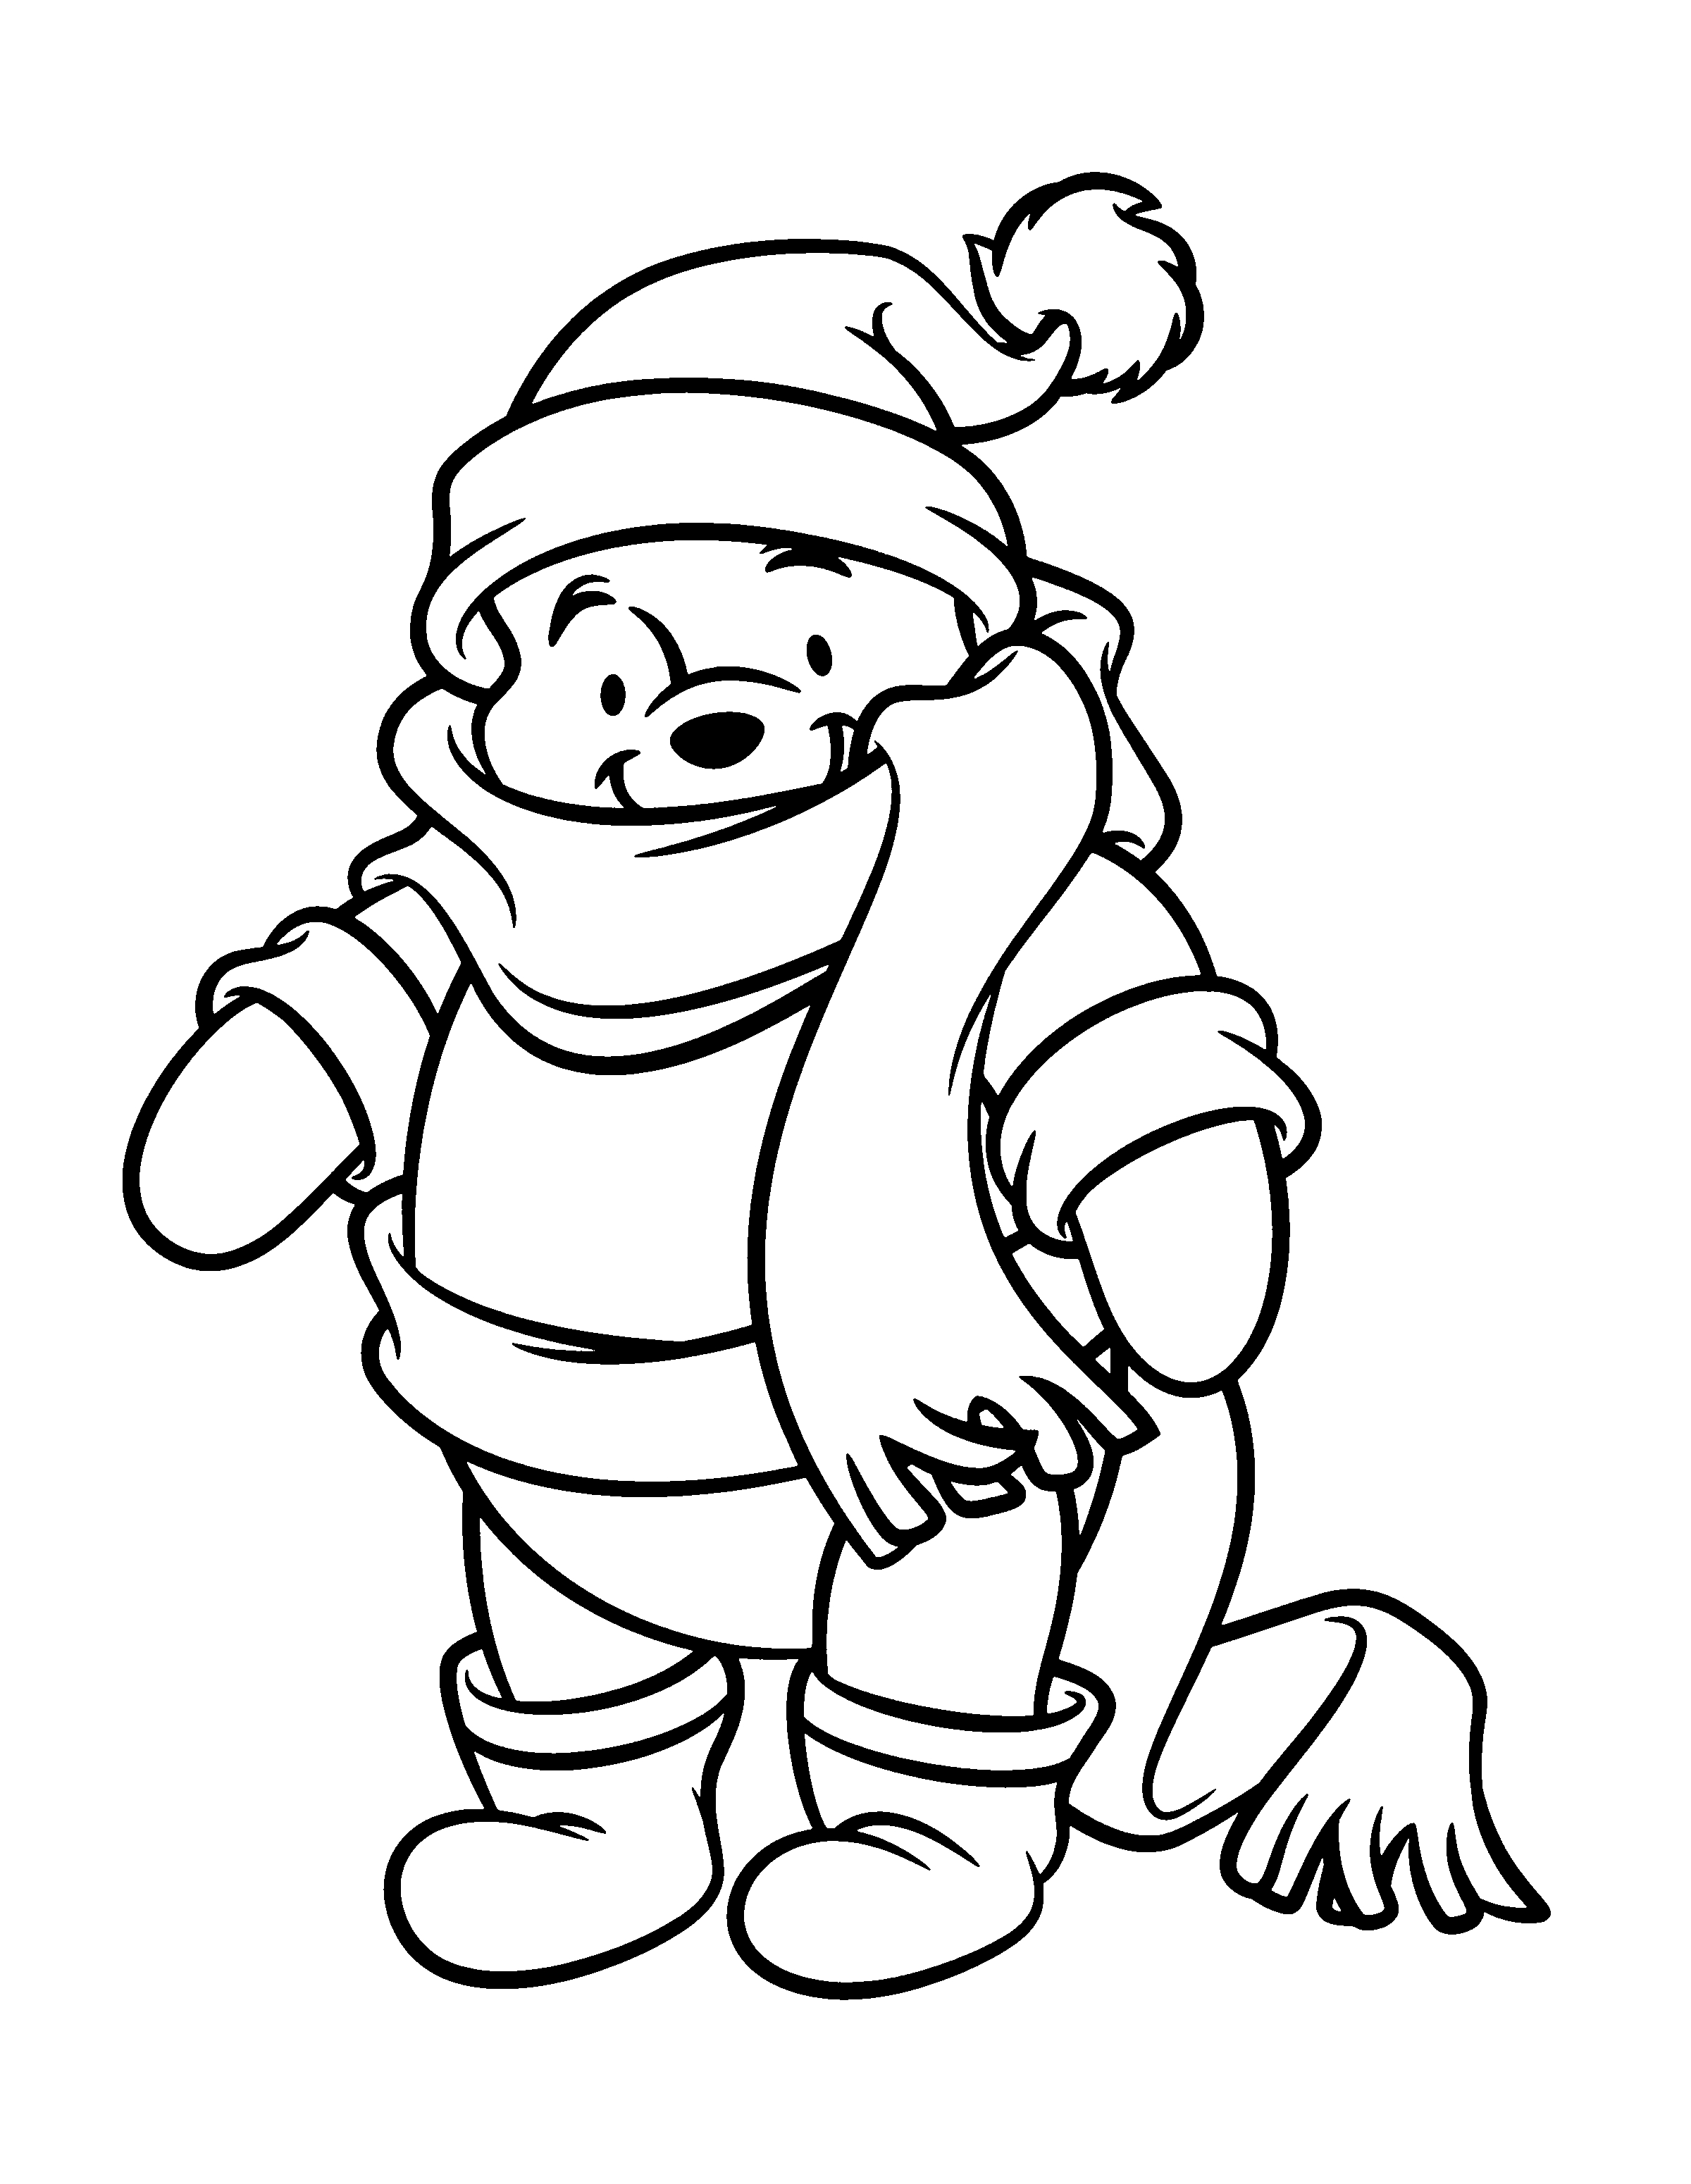 Winter Coloring Pages Printable Winnie The Pooh Coloring Pages Winter Winter Coloring Pages Of